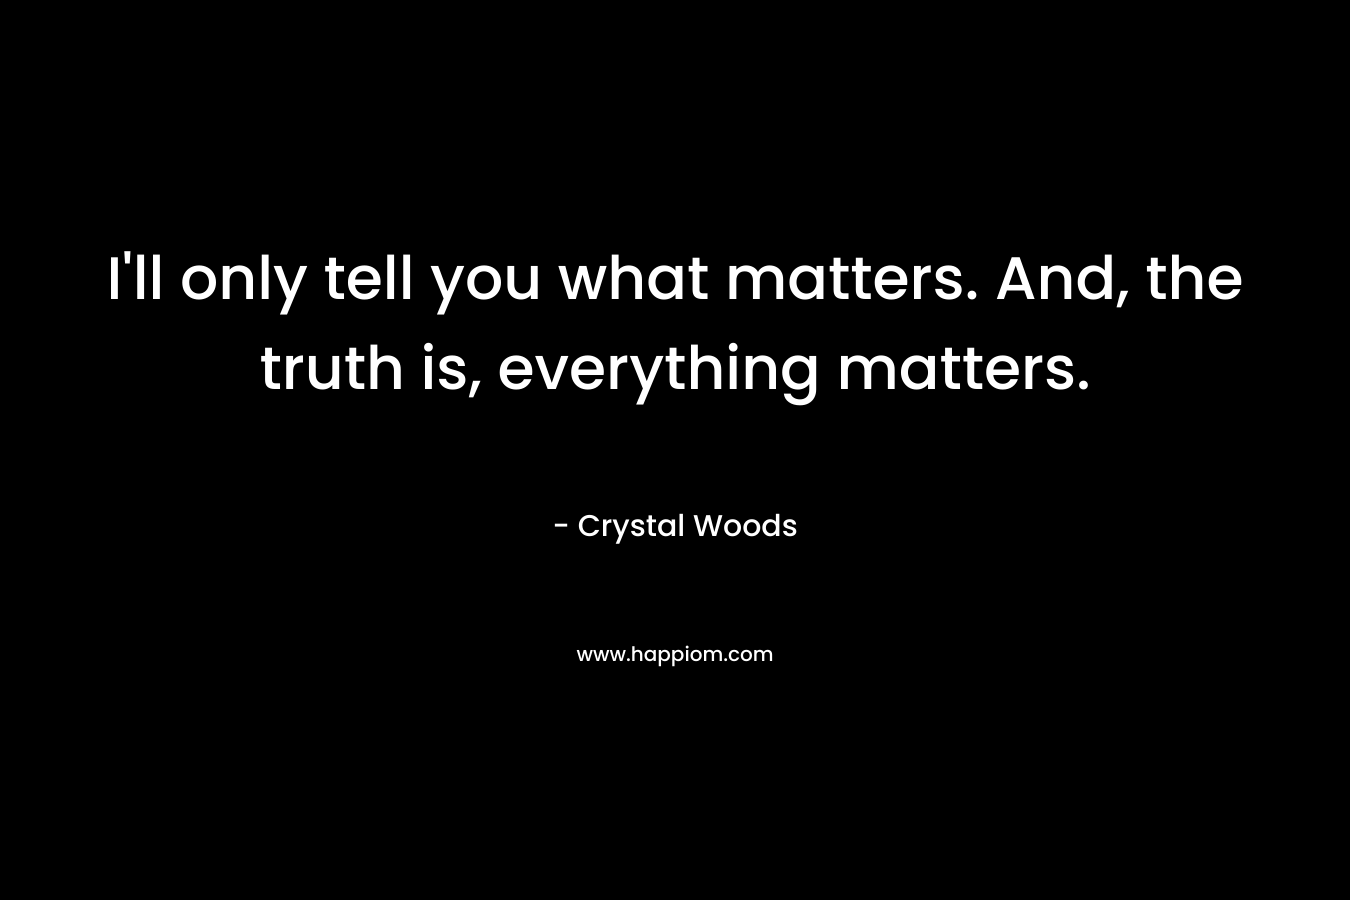 I'll only tell you what matters. And, the truth is, everything matters.